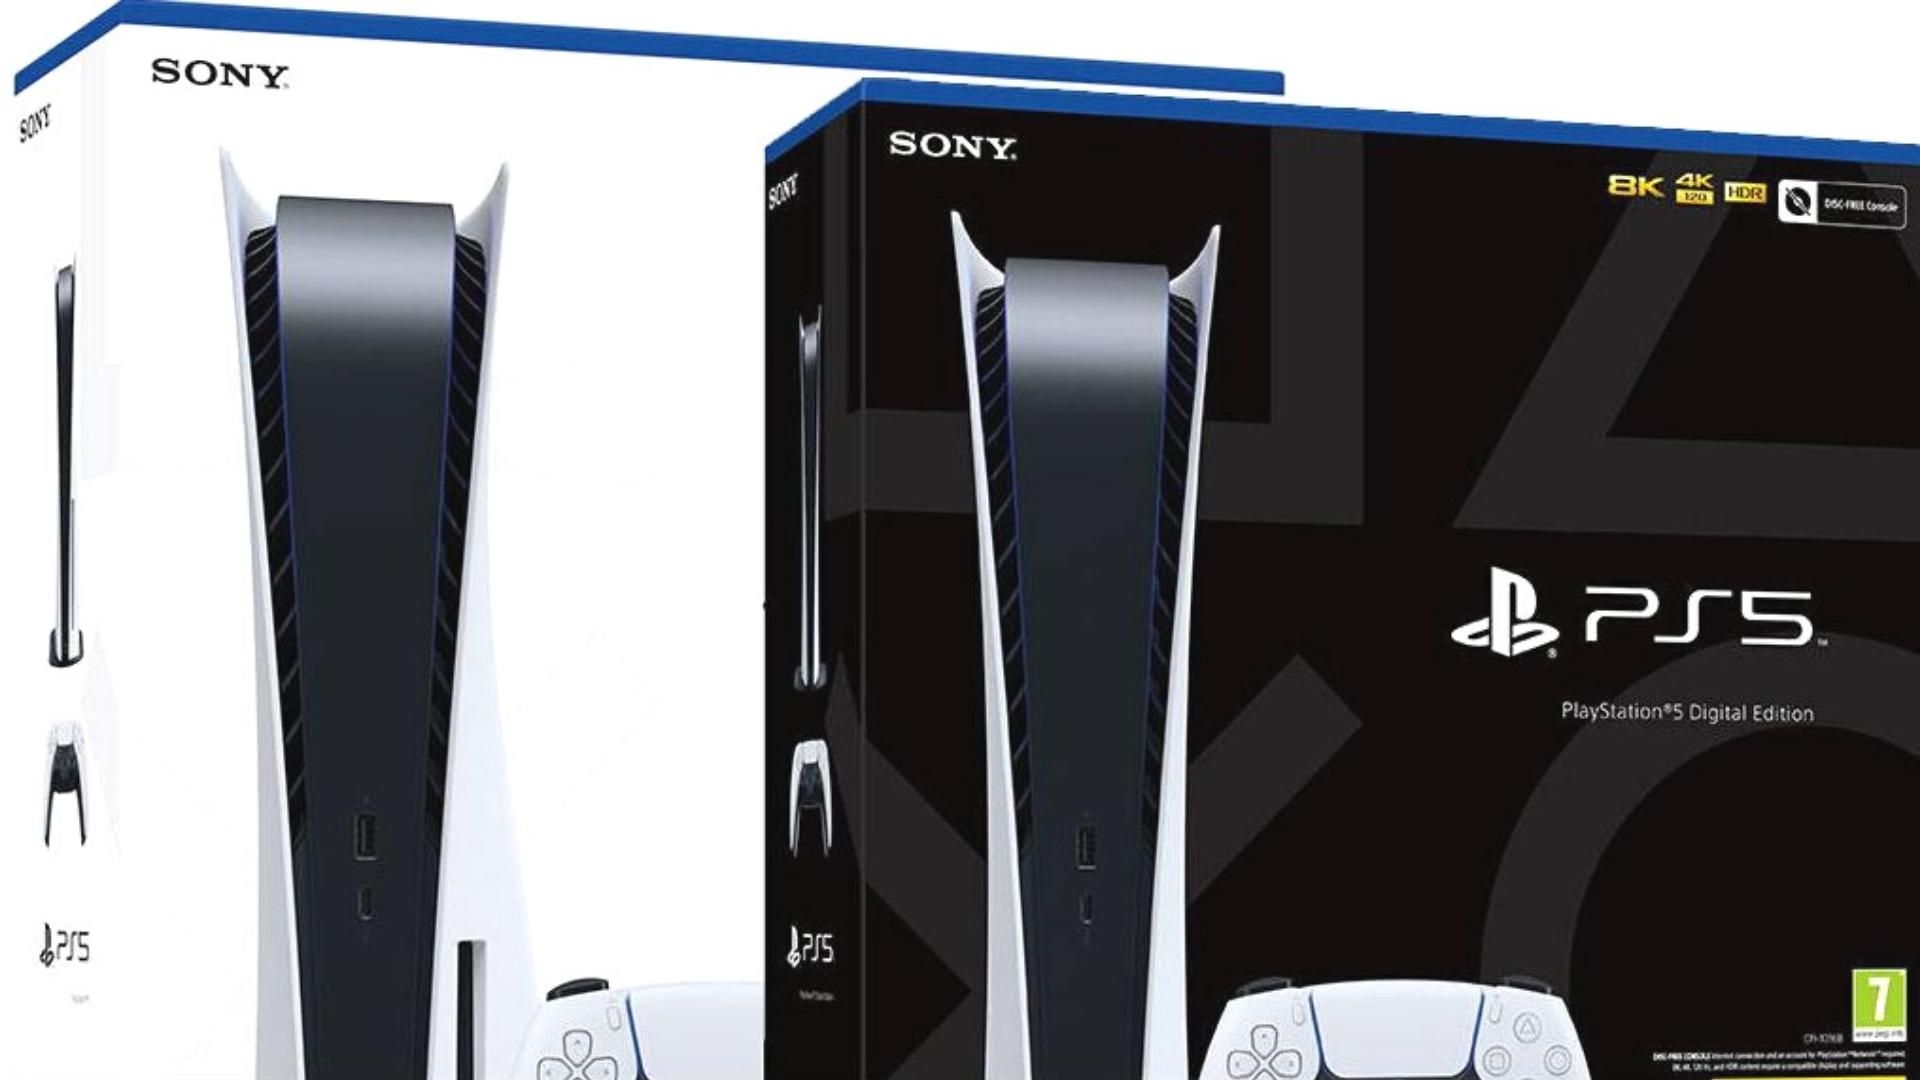 Sony-adds-holographic-sticker-to-its-consoles-to-deter-PS5-scalpers-GamersRD